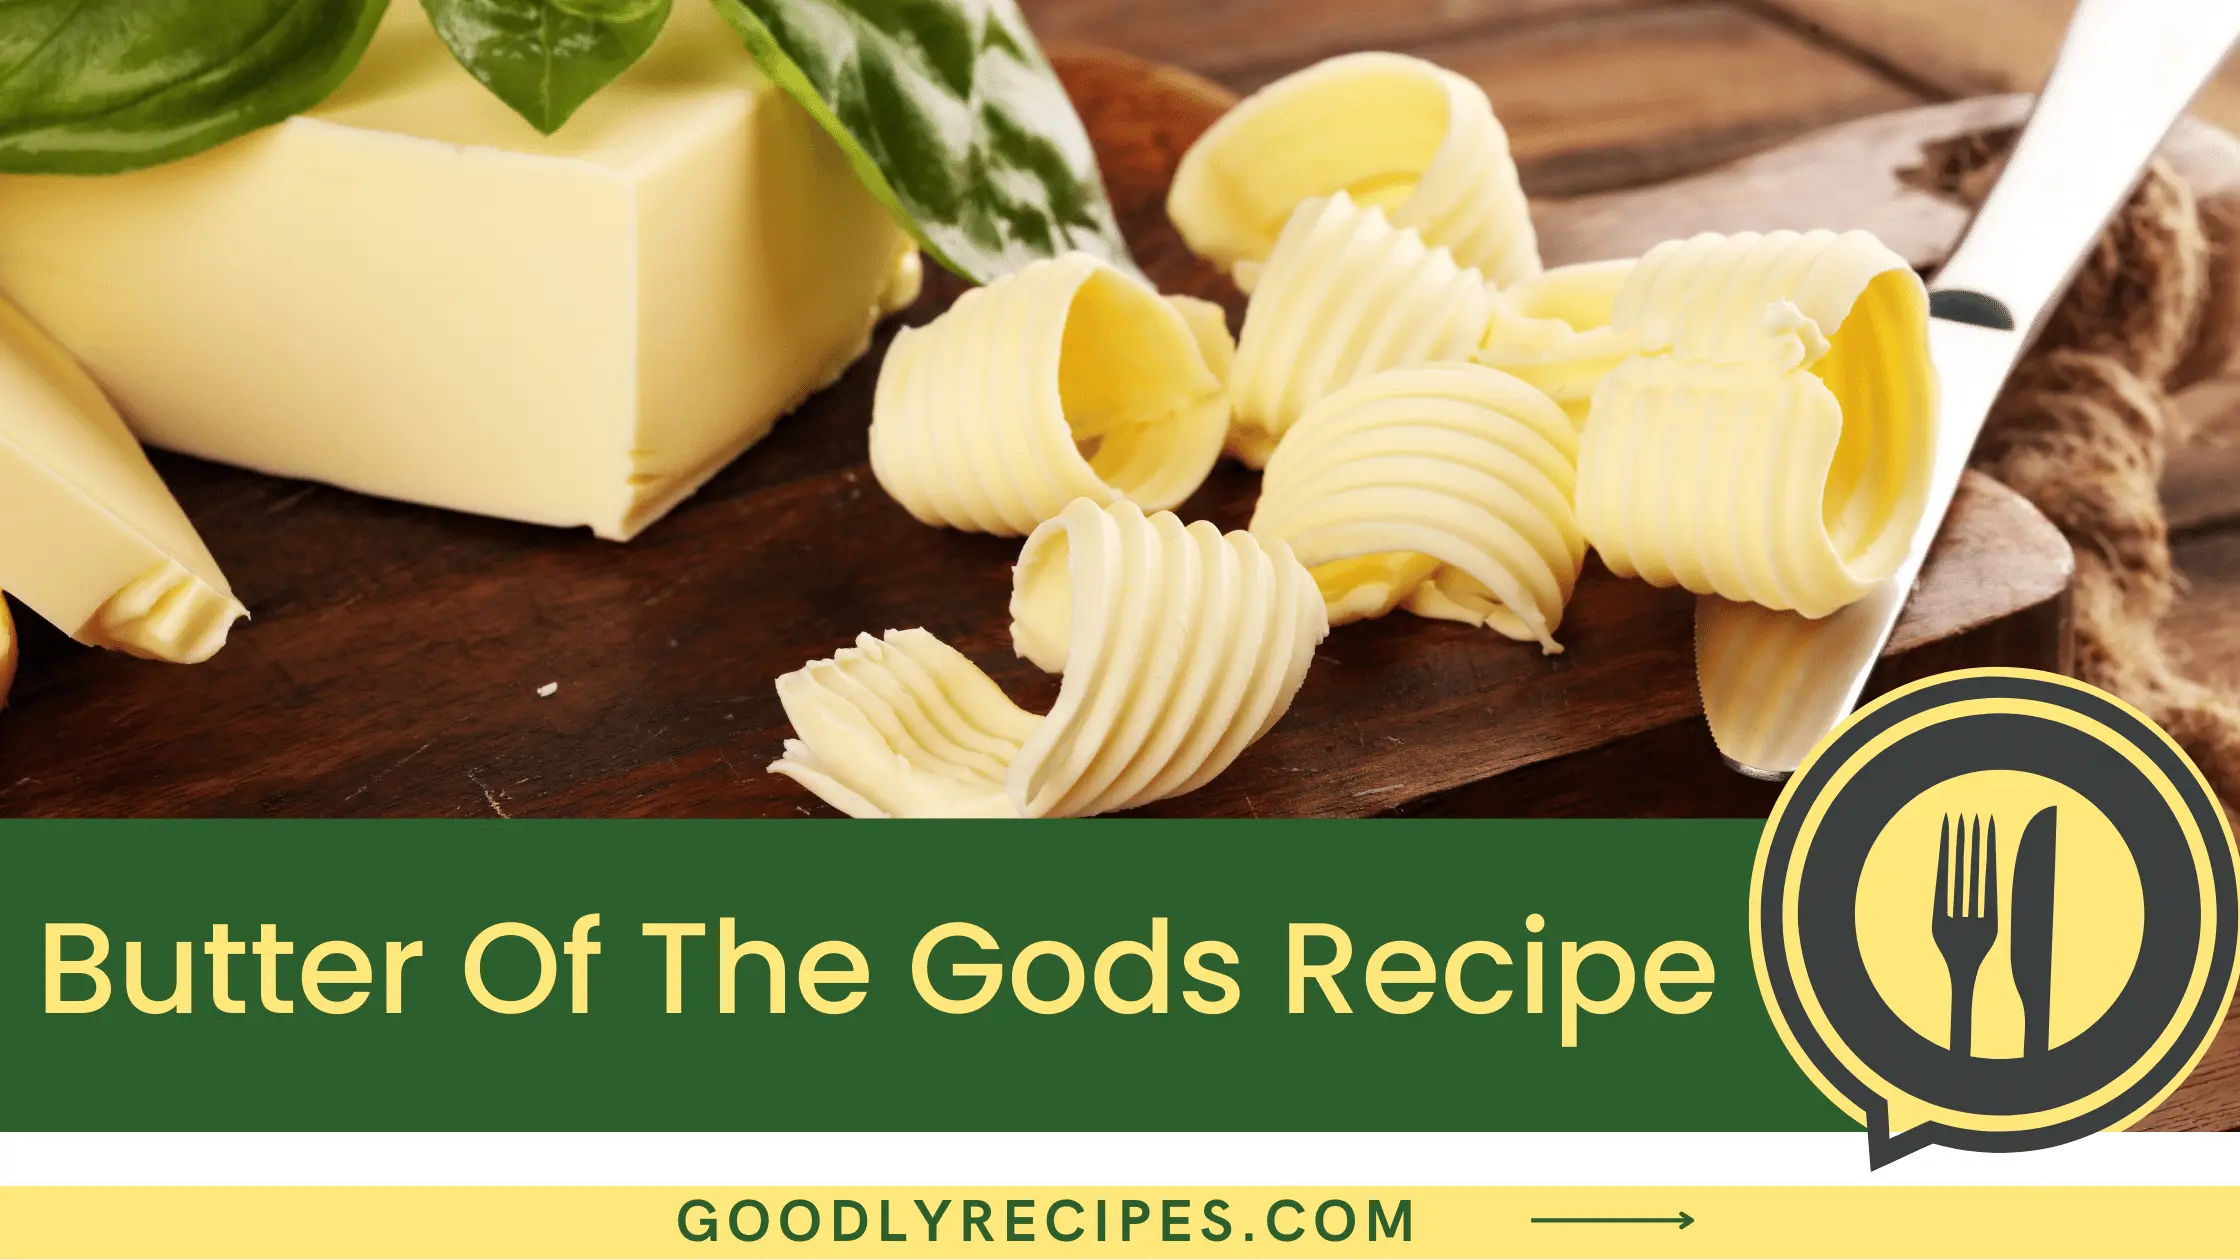 What is Butter Of The Gods Recipe?